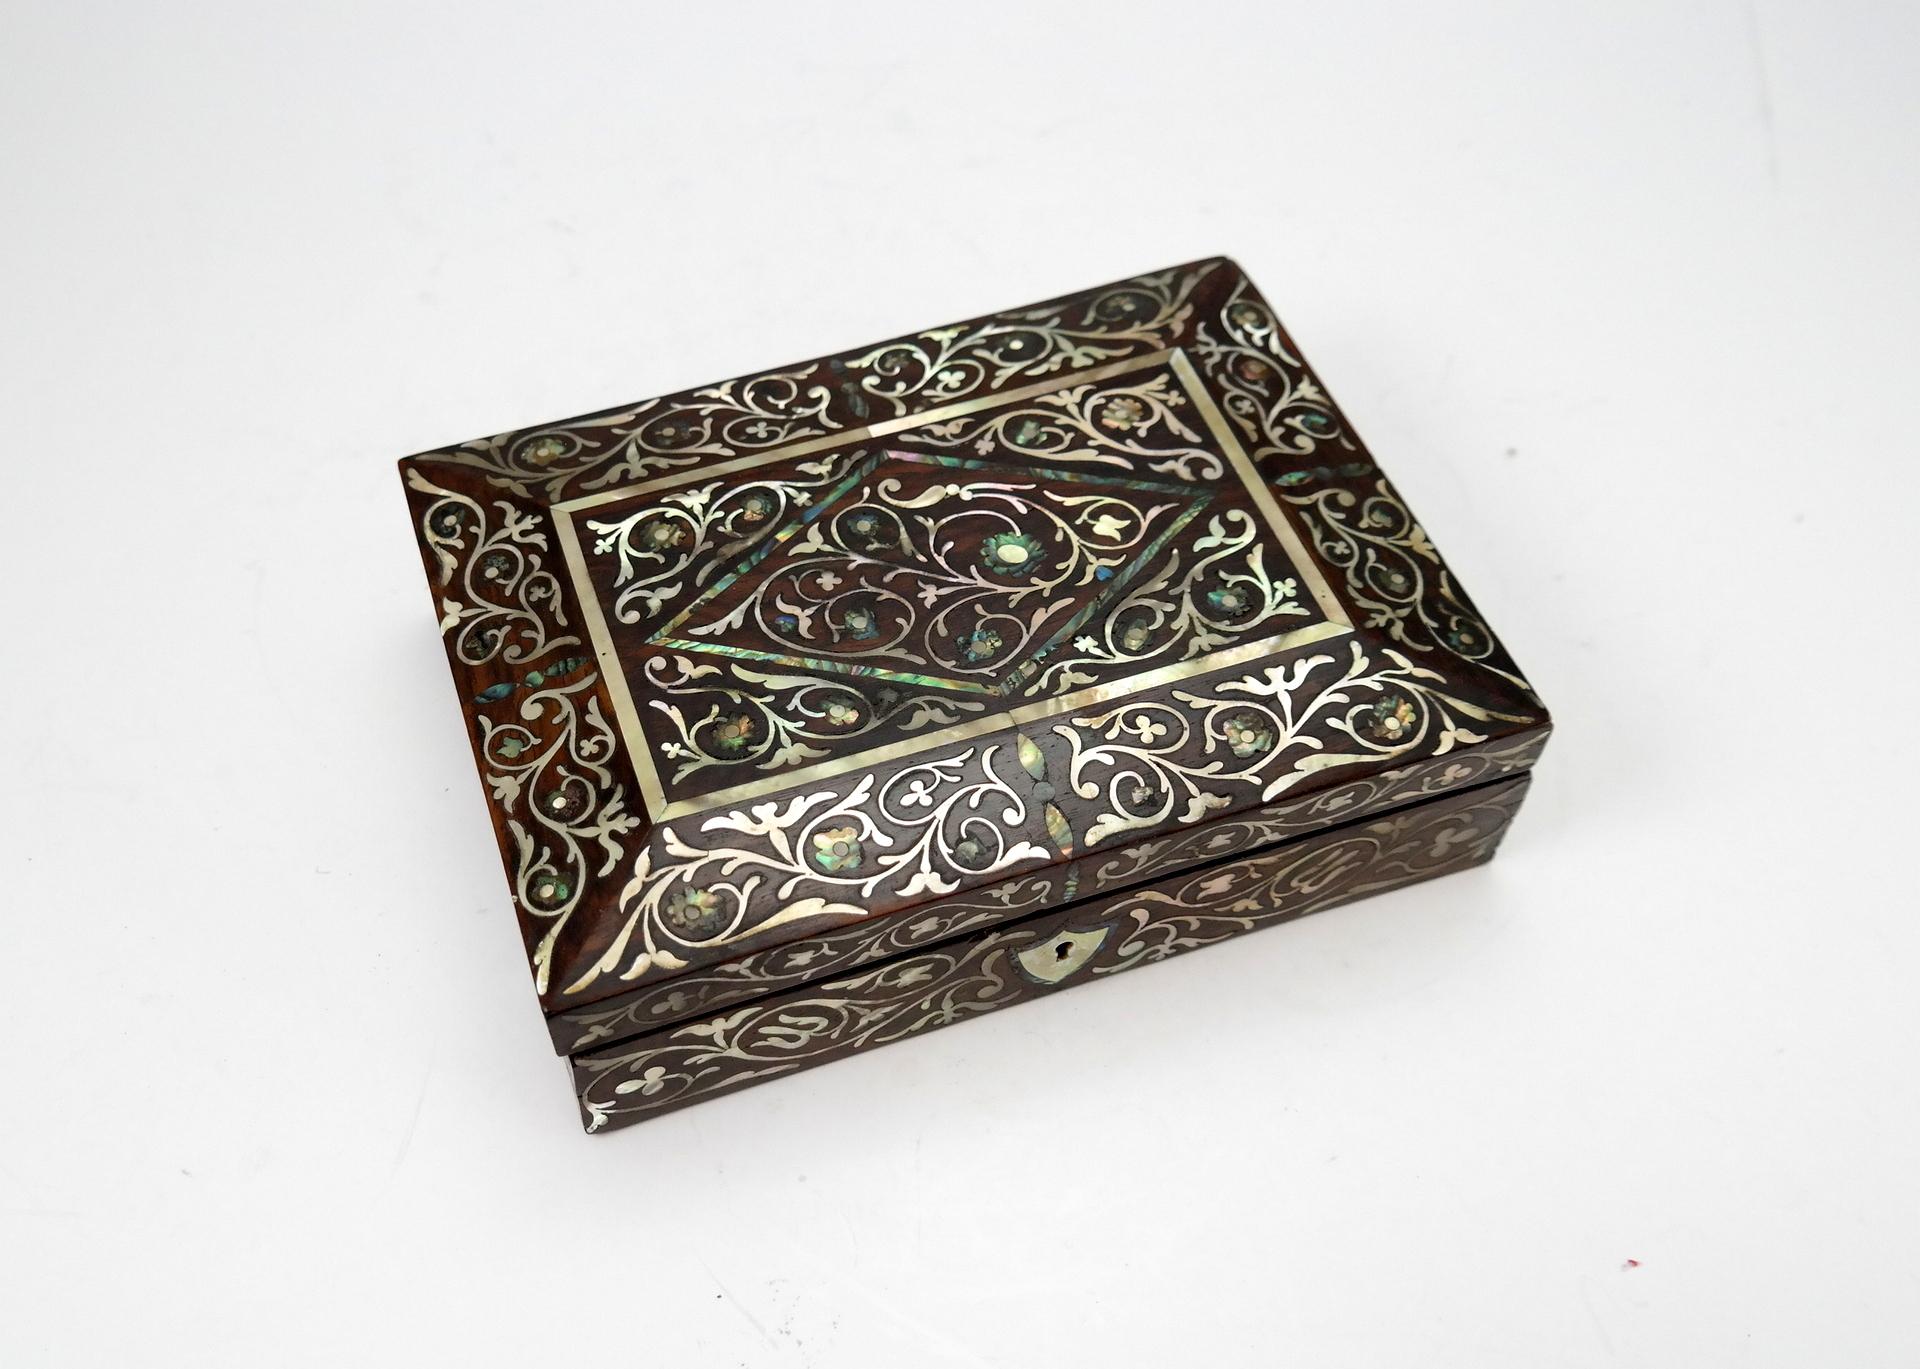 Wooden jewelry/trinket box with mother of pearl inlay.